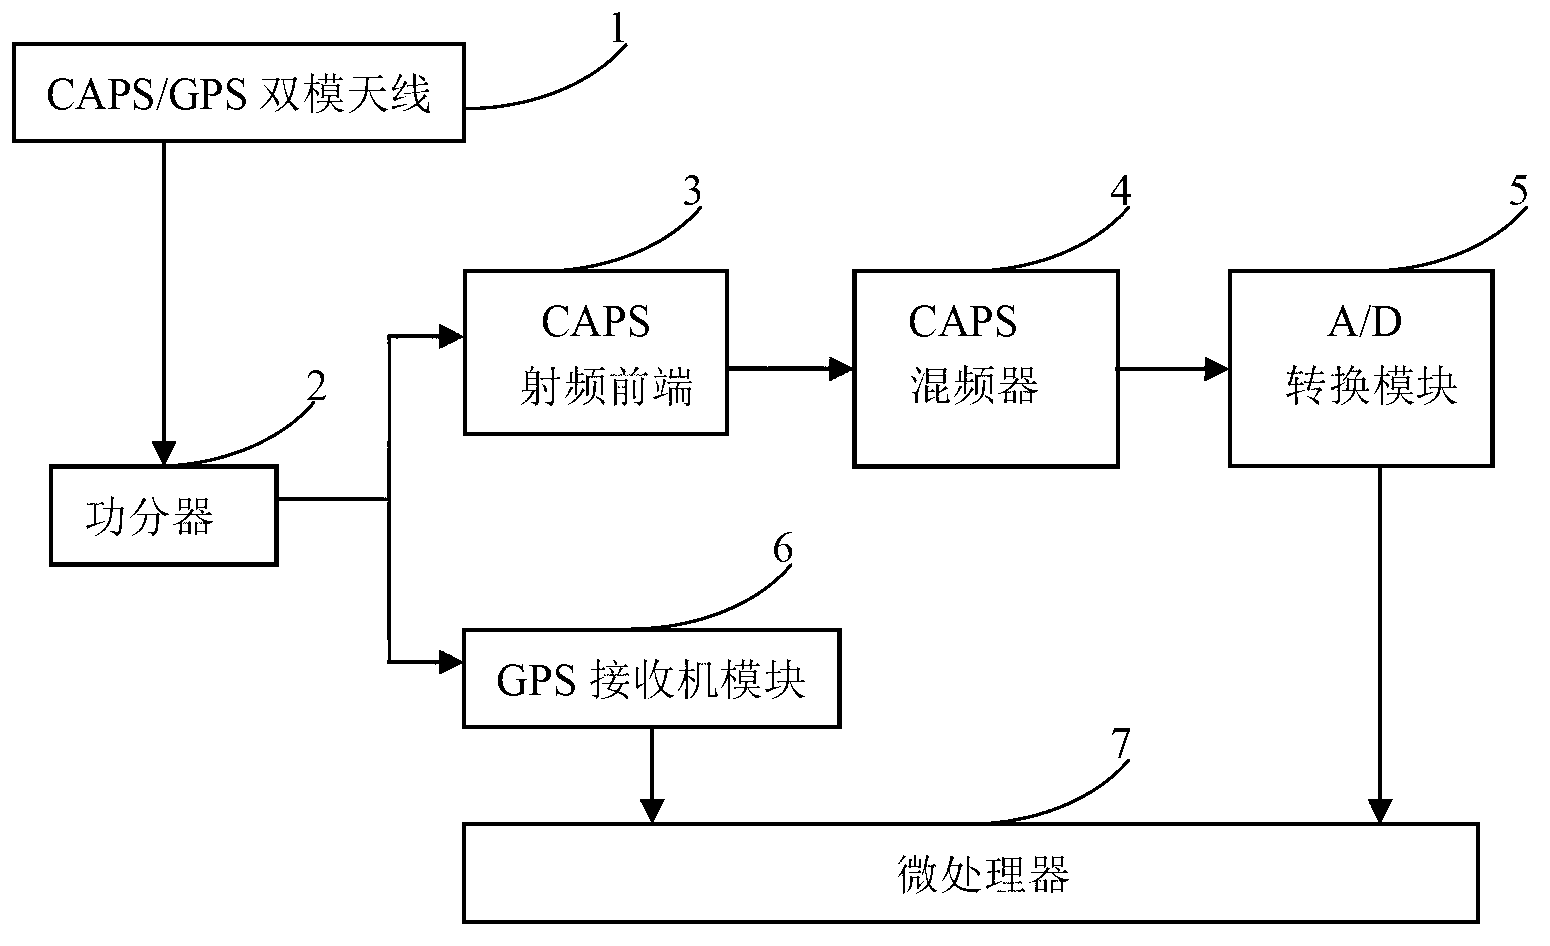 Chinese area positioning system (CAPS)/global positioning system (GPS) dual-mode receiver